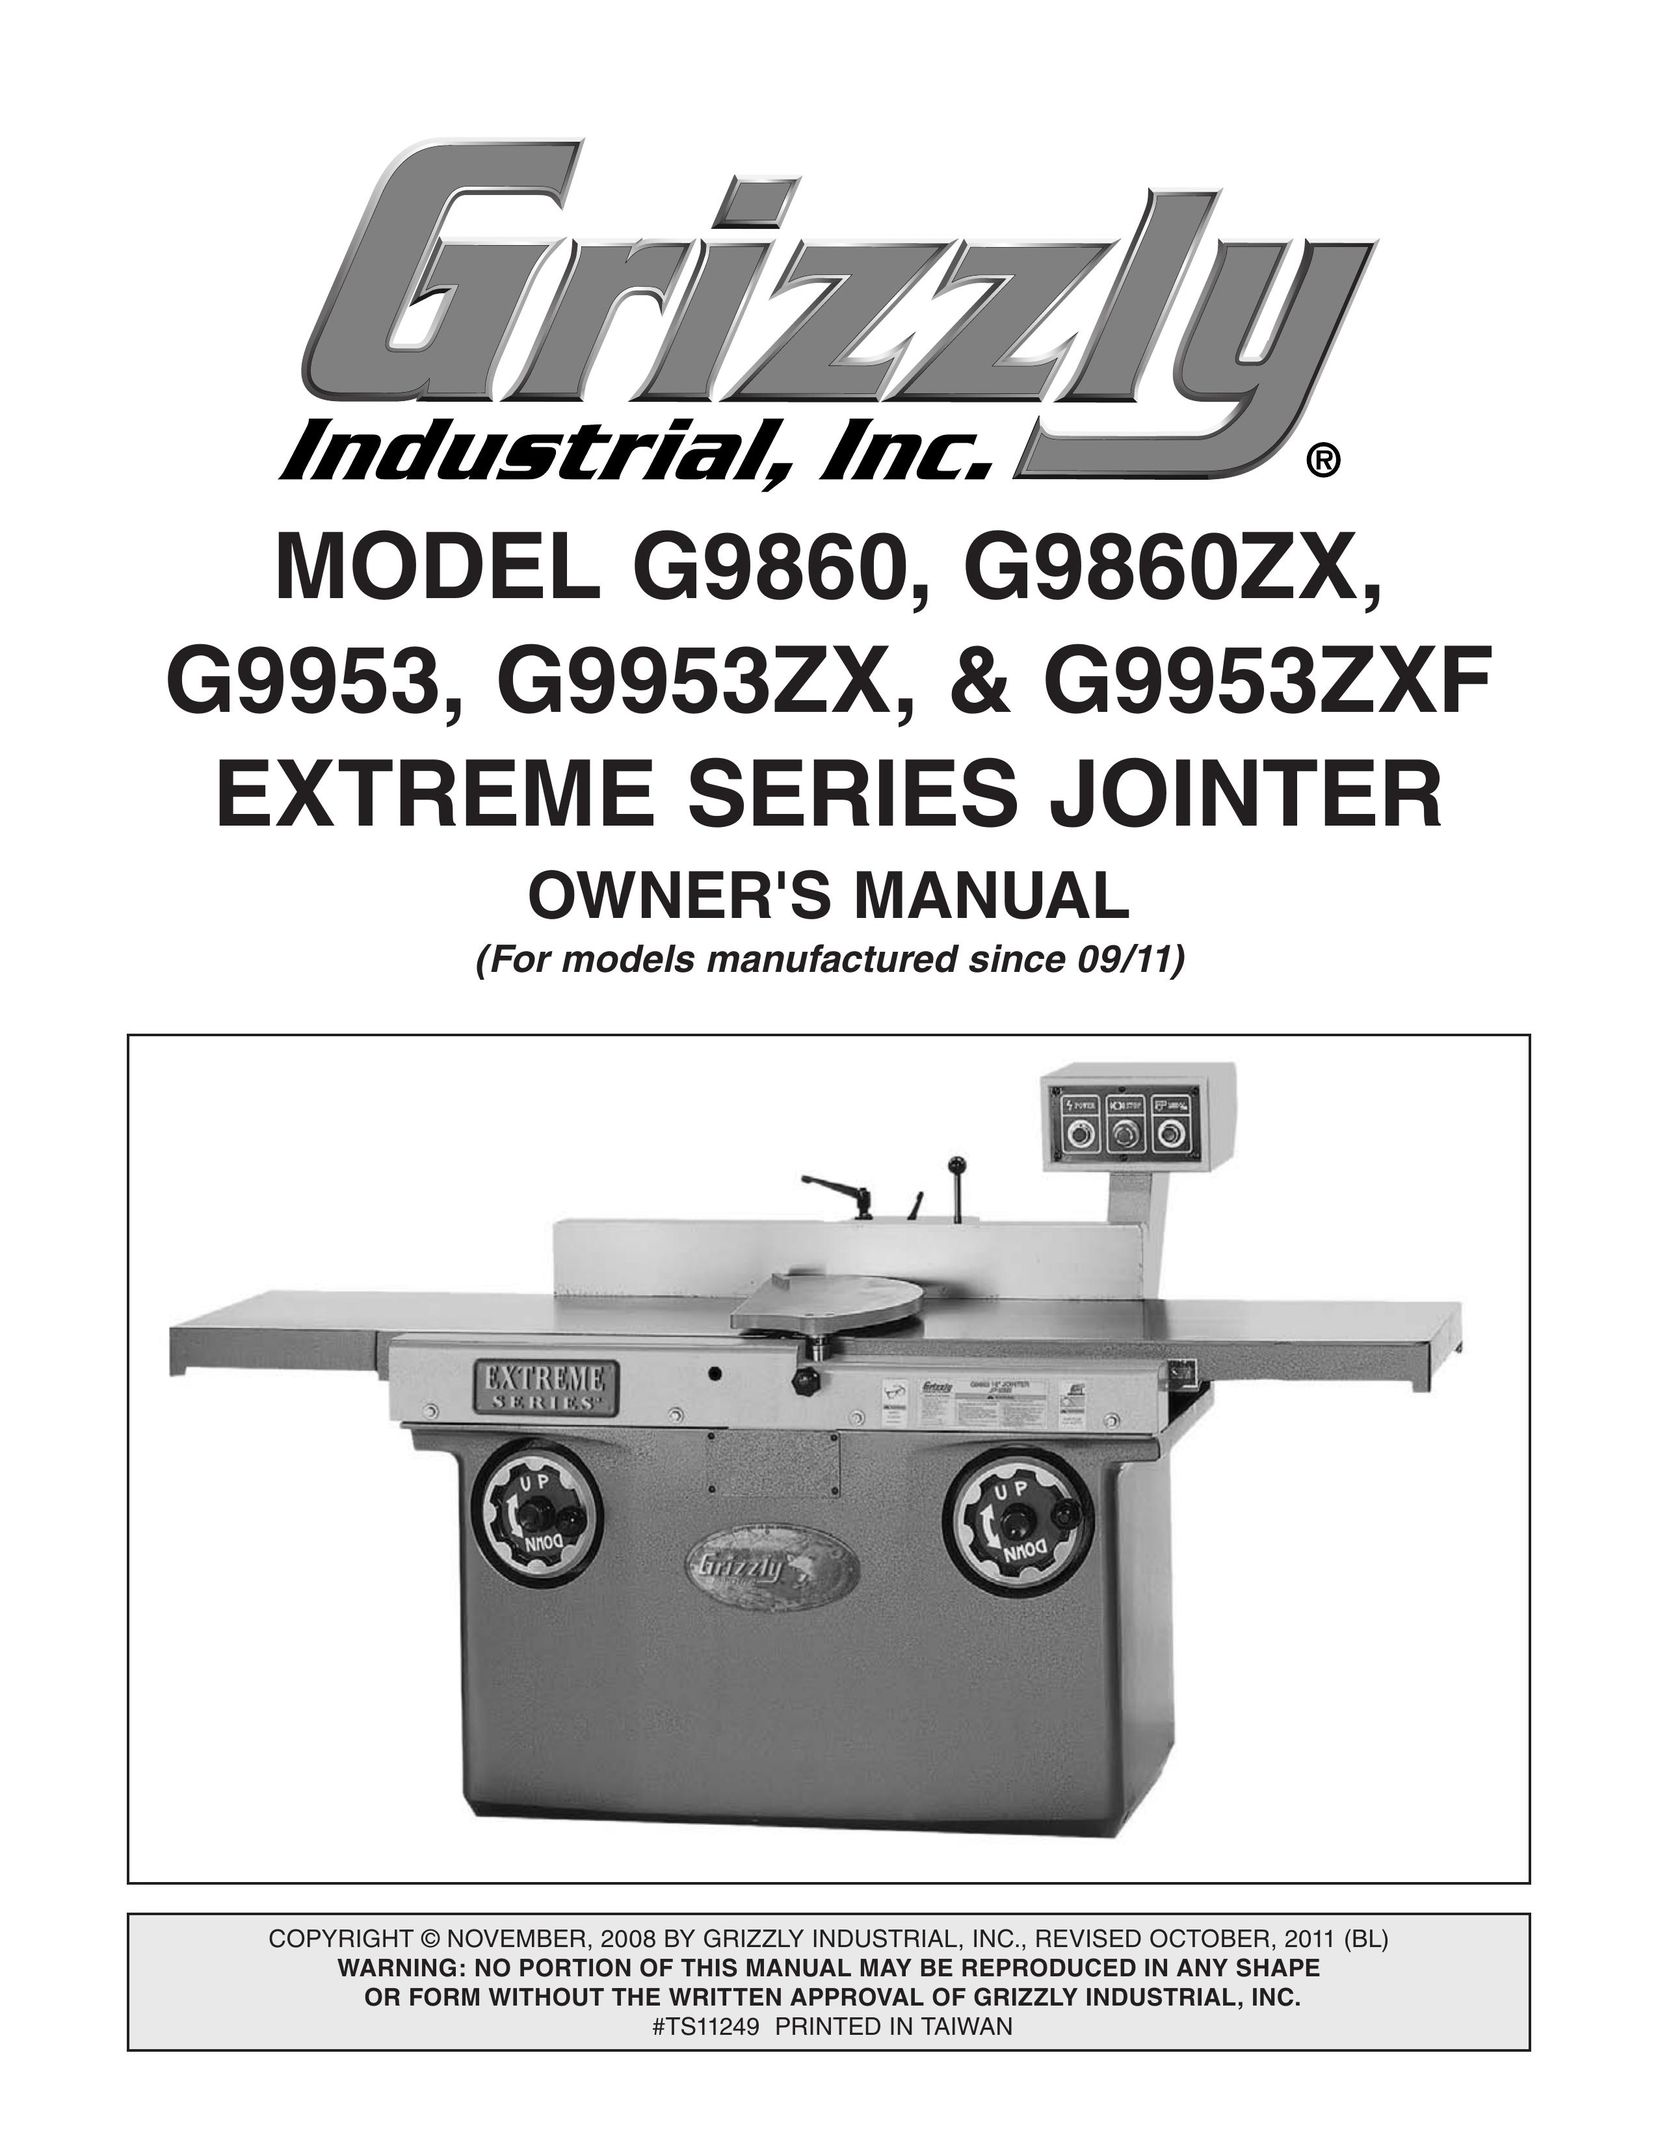 Grizzly G9860 Biscuit Joiner User Manual